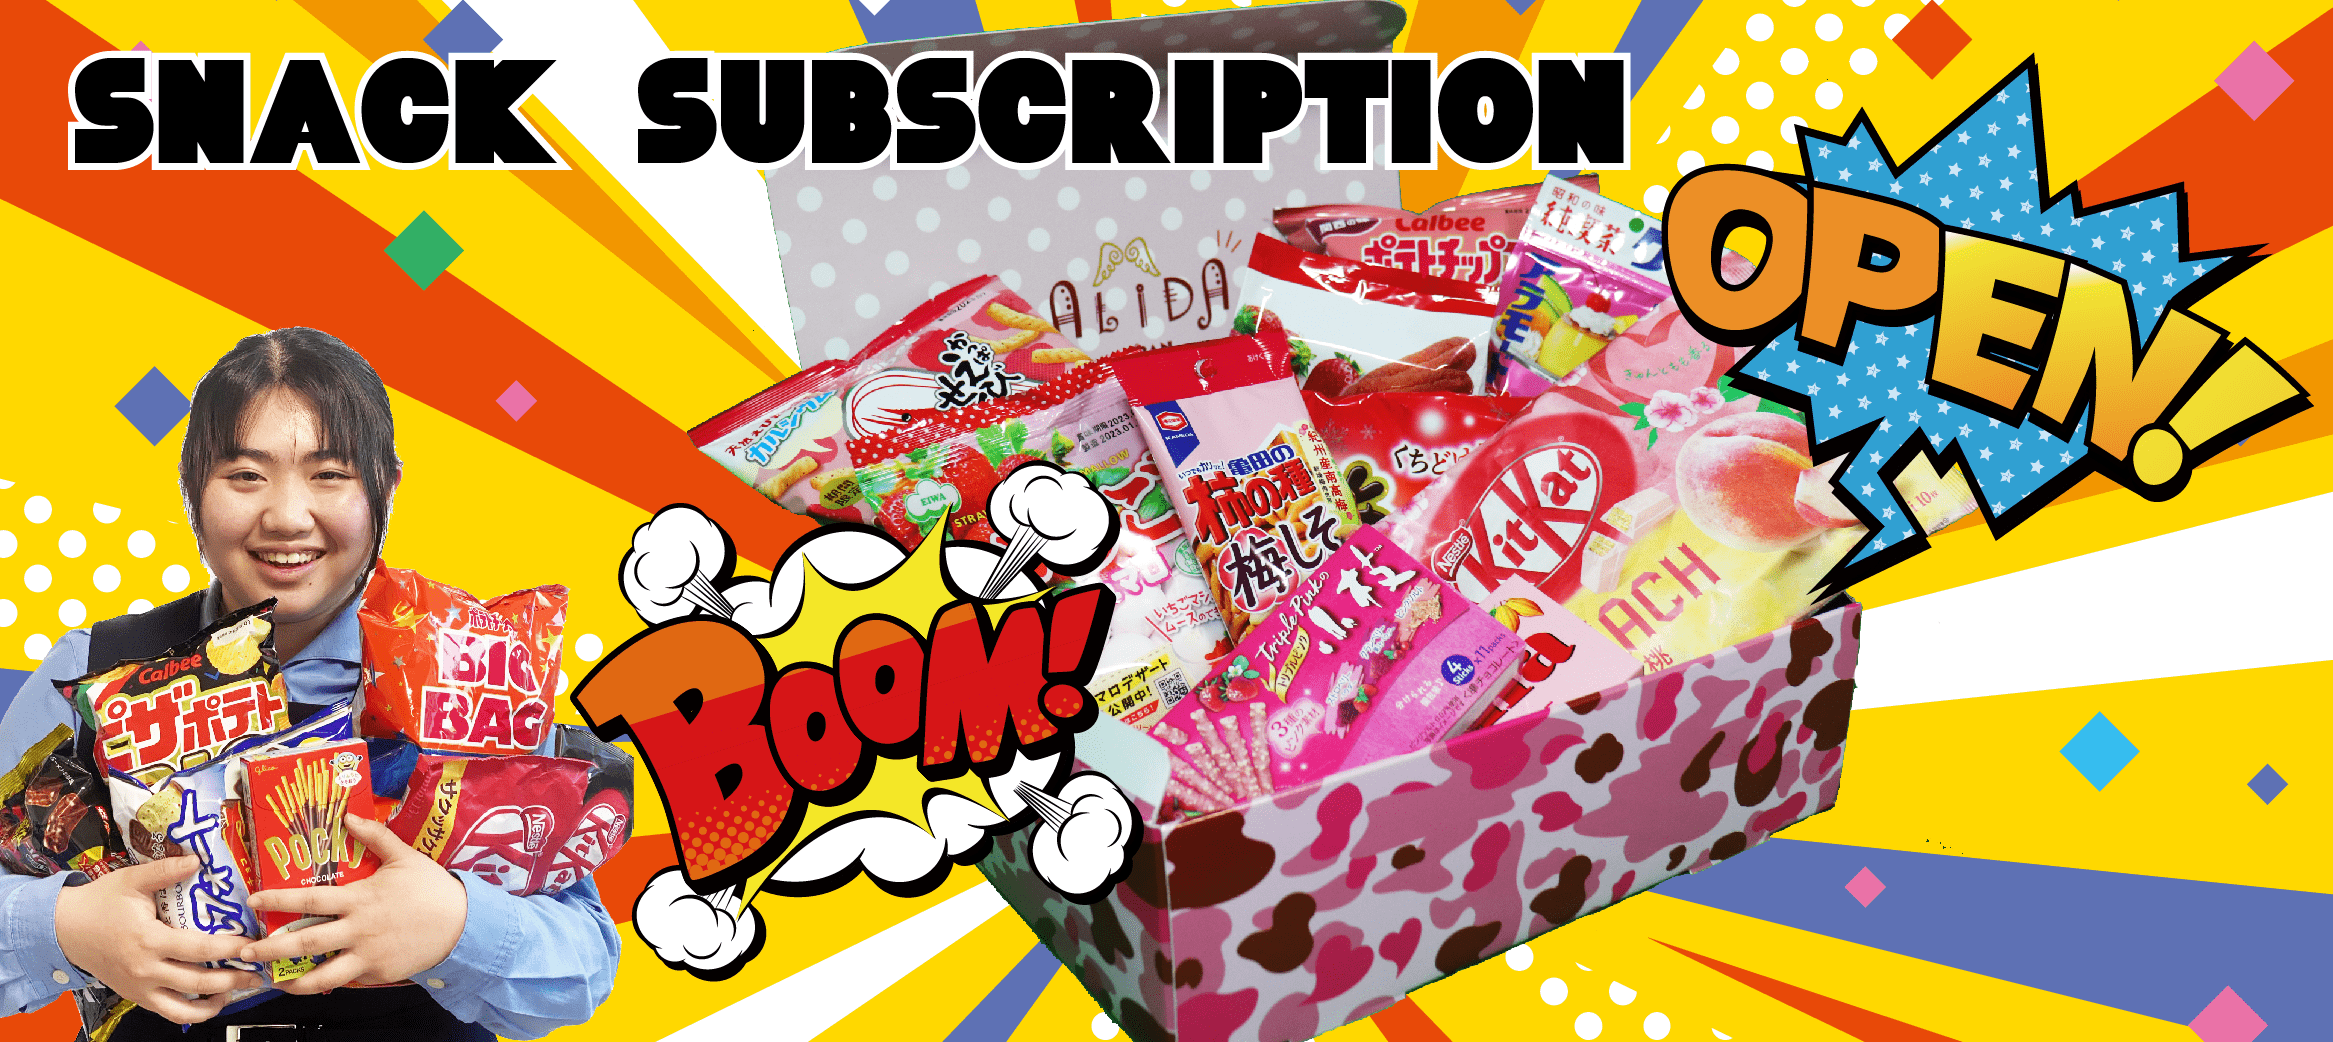 SNACK SUBSCRIPTION